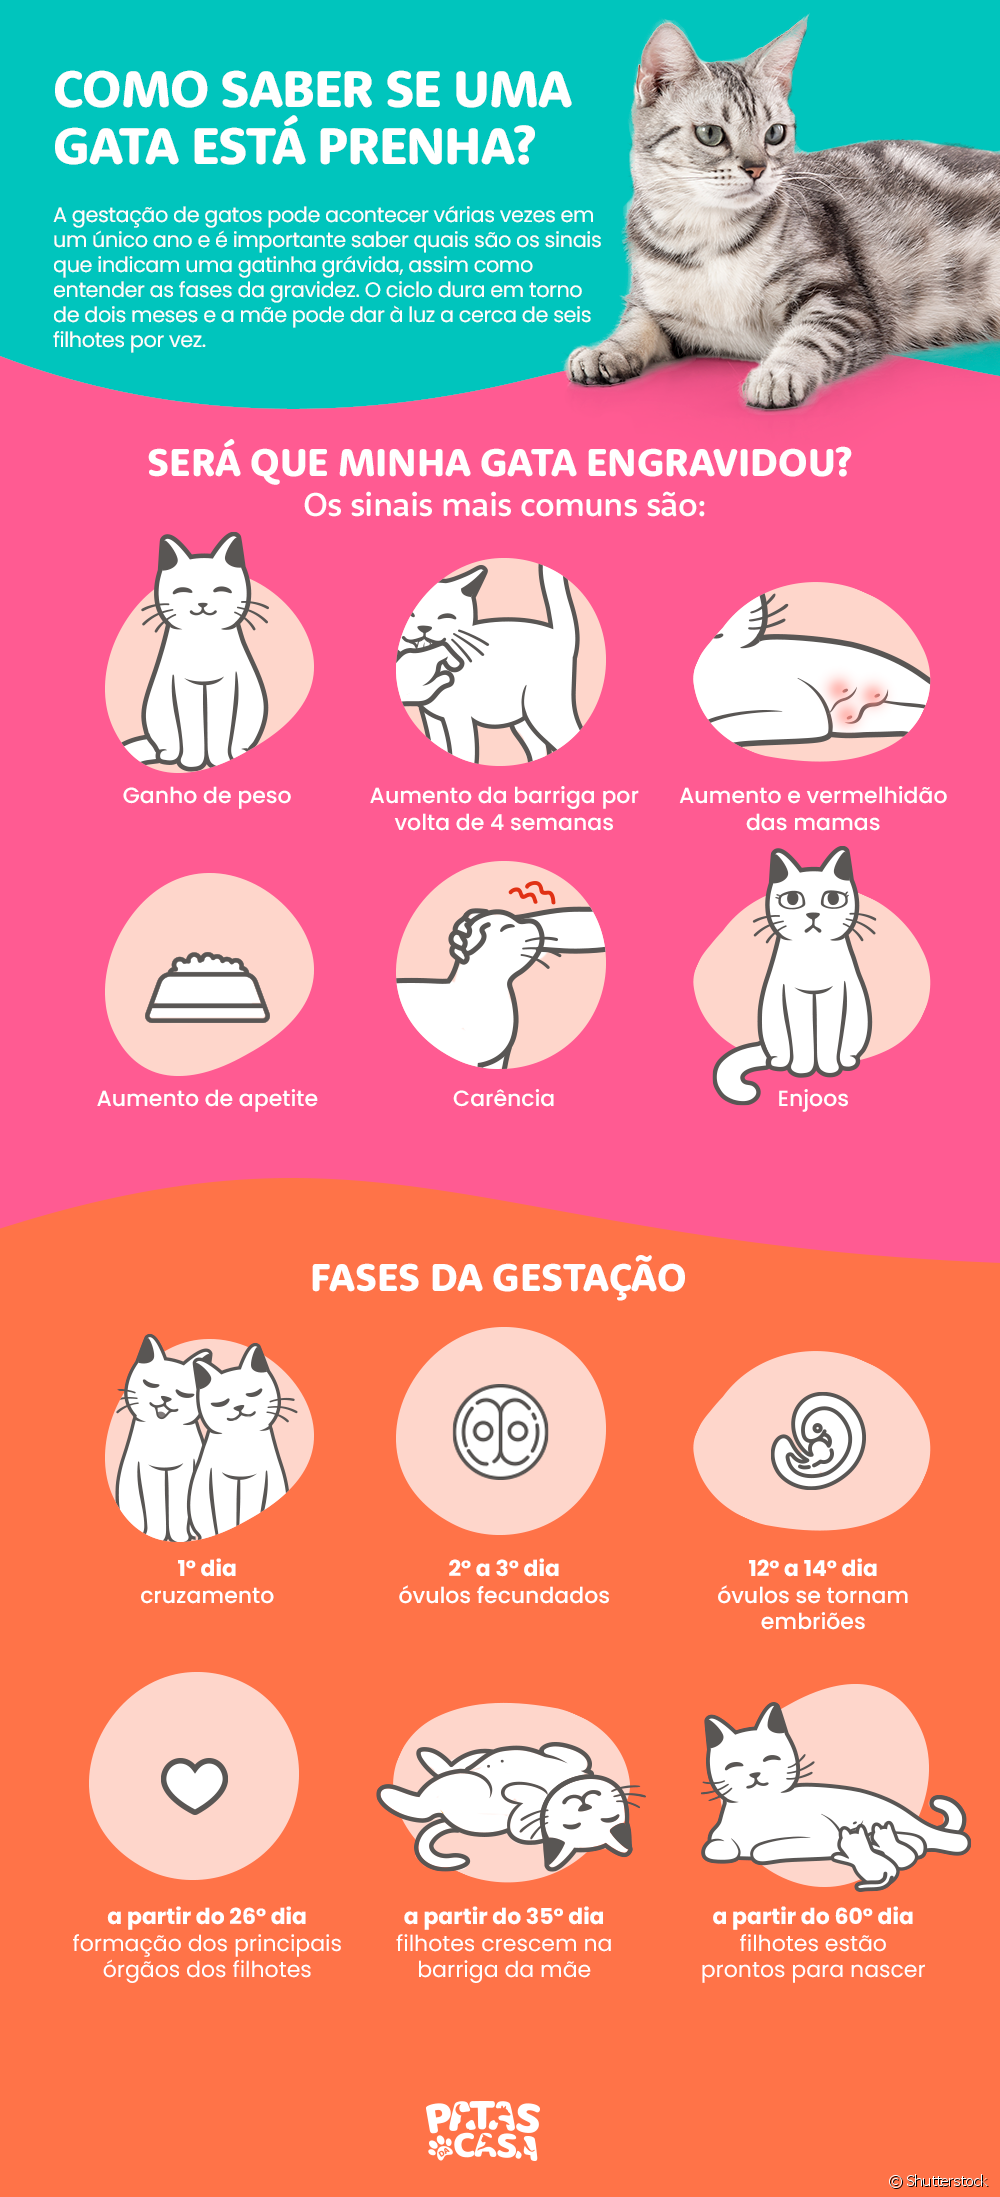  See infographic on the stages of cat pregnancy